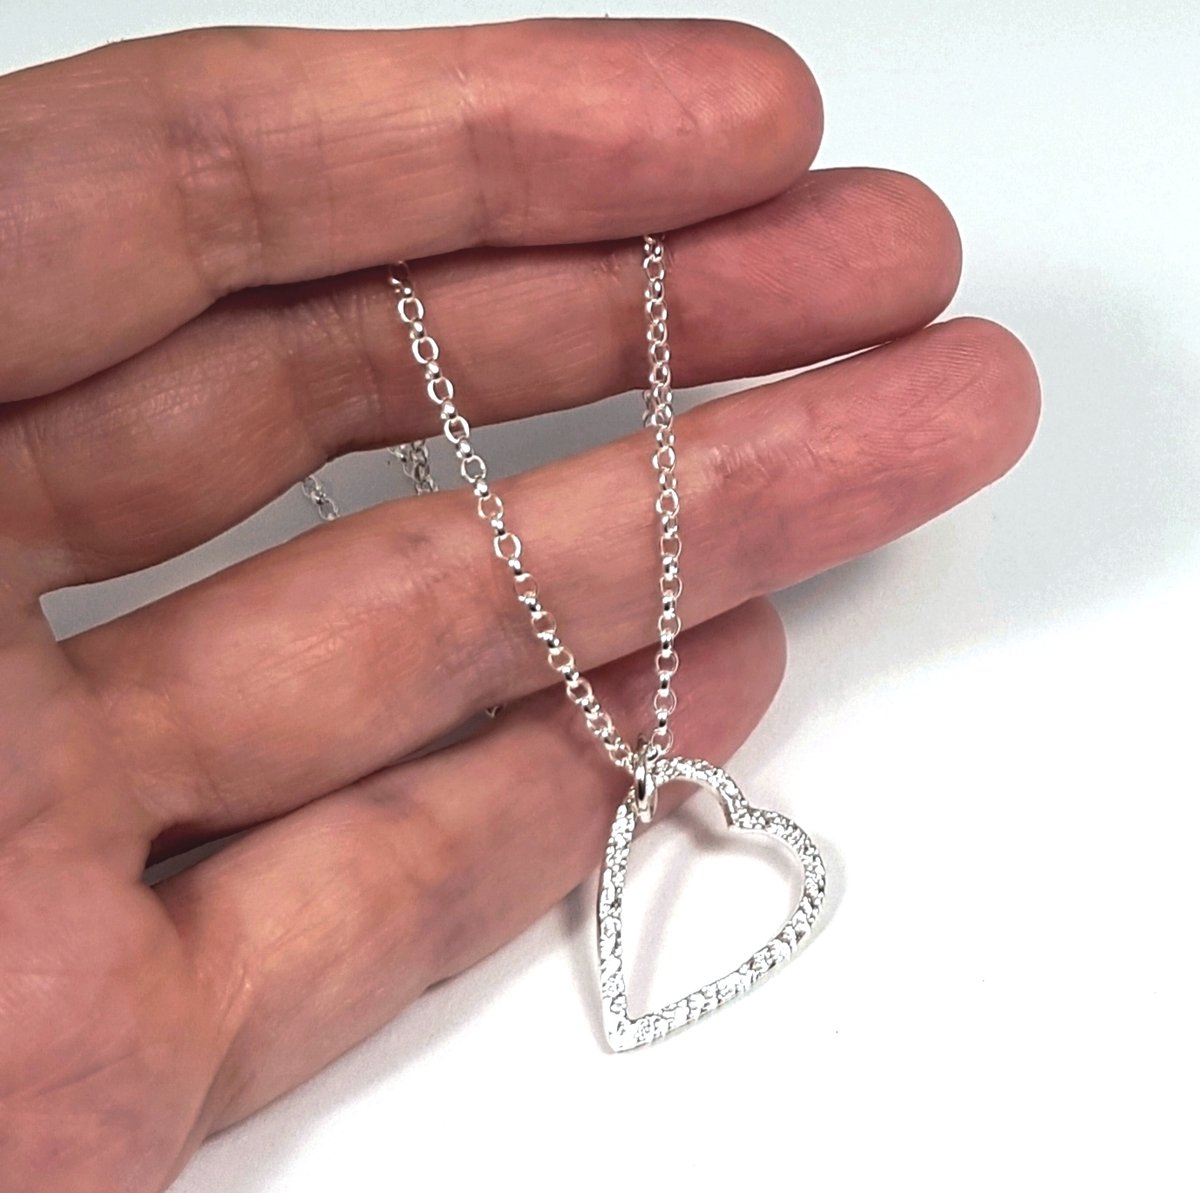 Image of Sterling Silver Heart Pendant Necklace, Textured Heart Necklace (Go Grace)